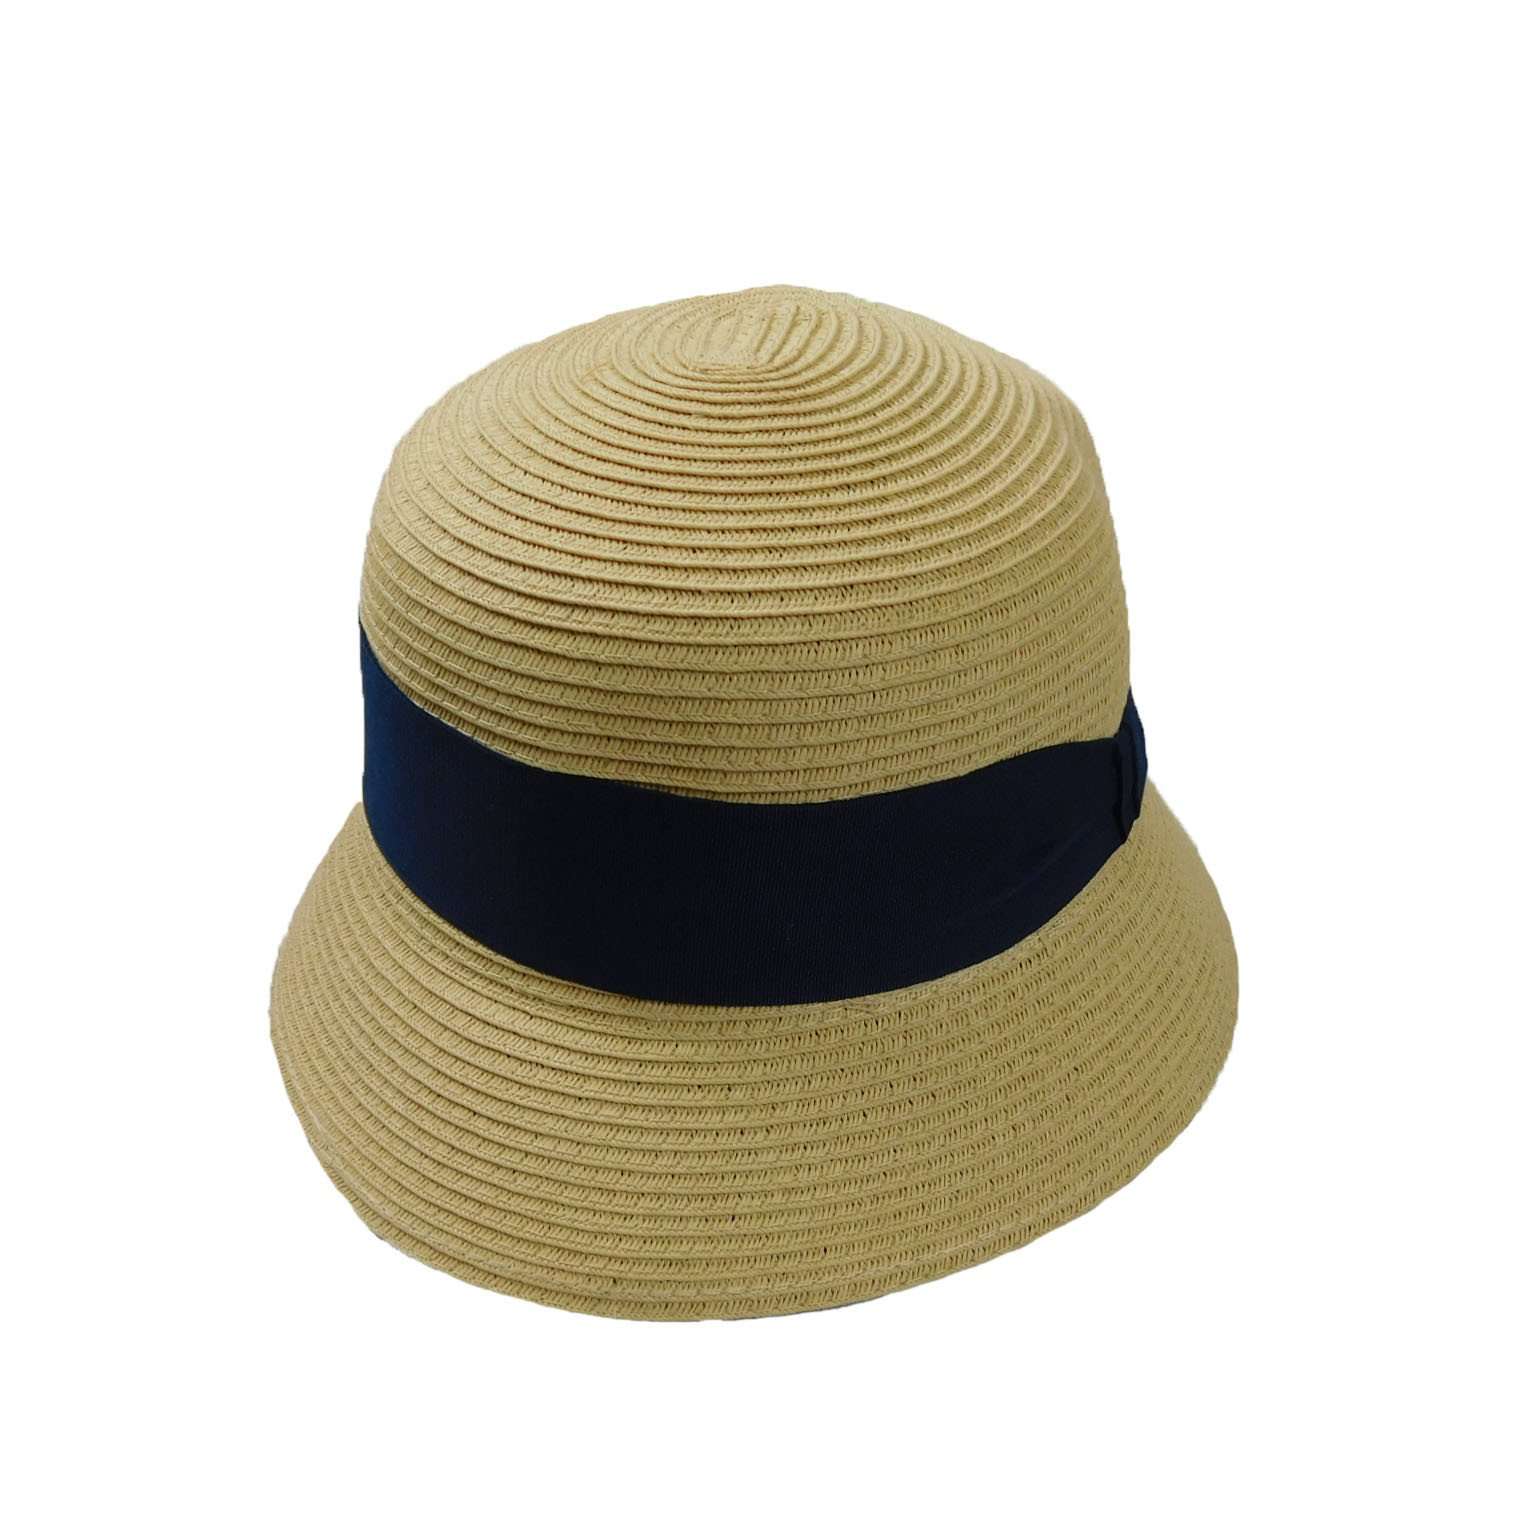 Summer Cloche with Wide Band Cloche Boardwalk Style Hats WSPS563NV Natural and Navy  